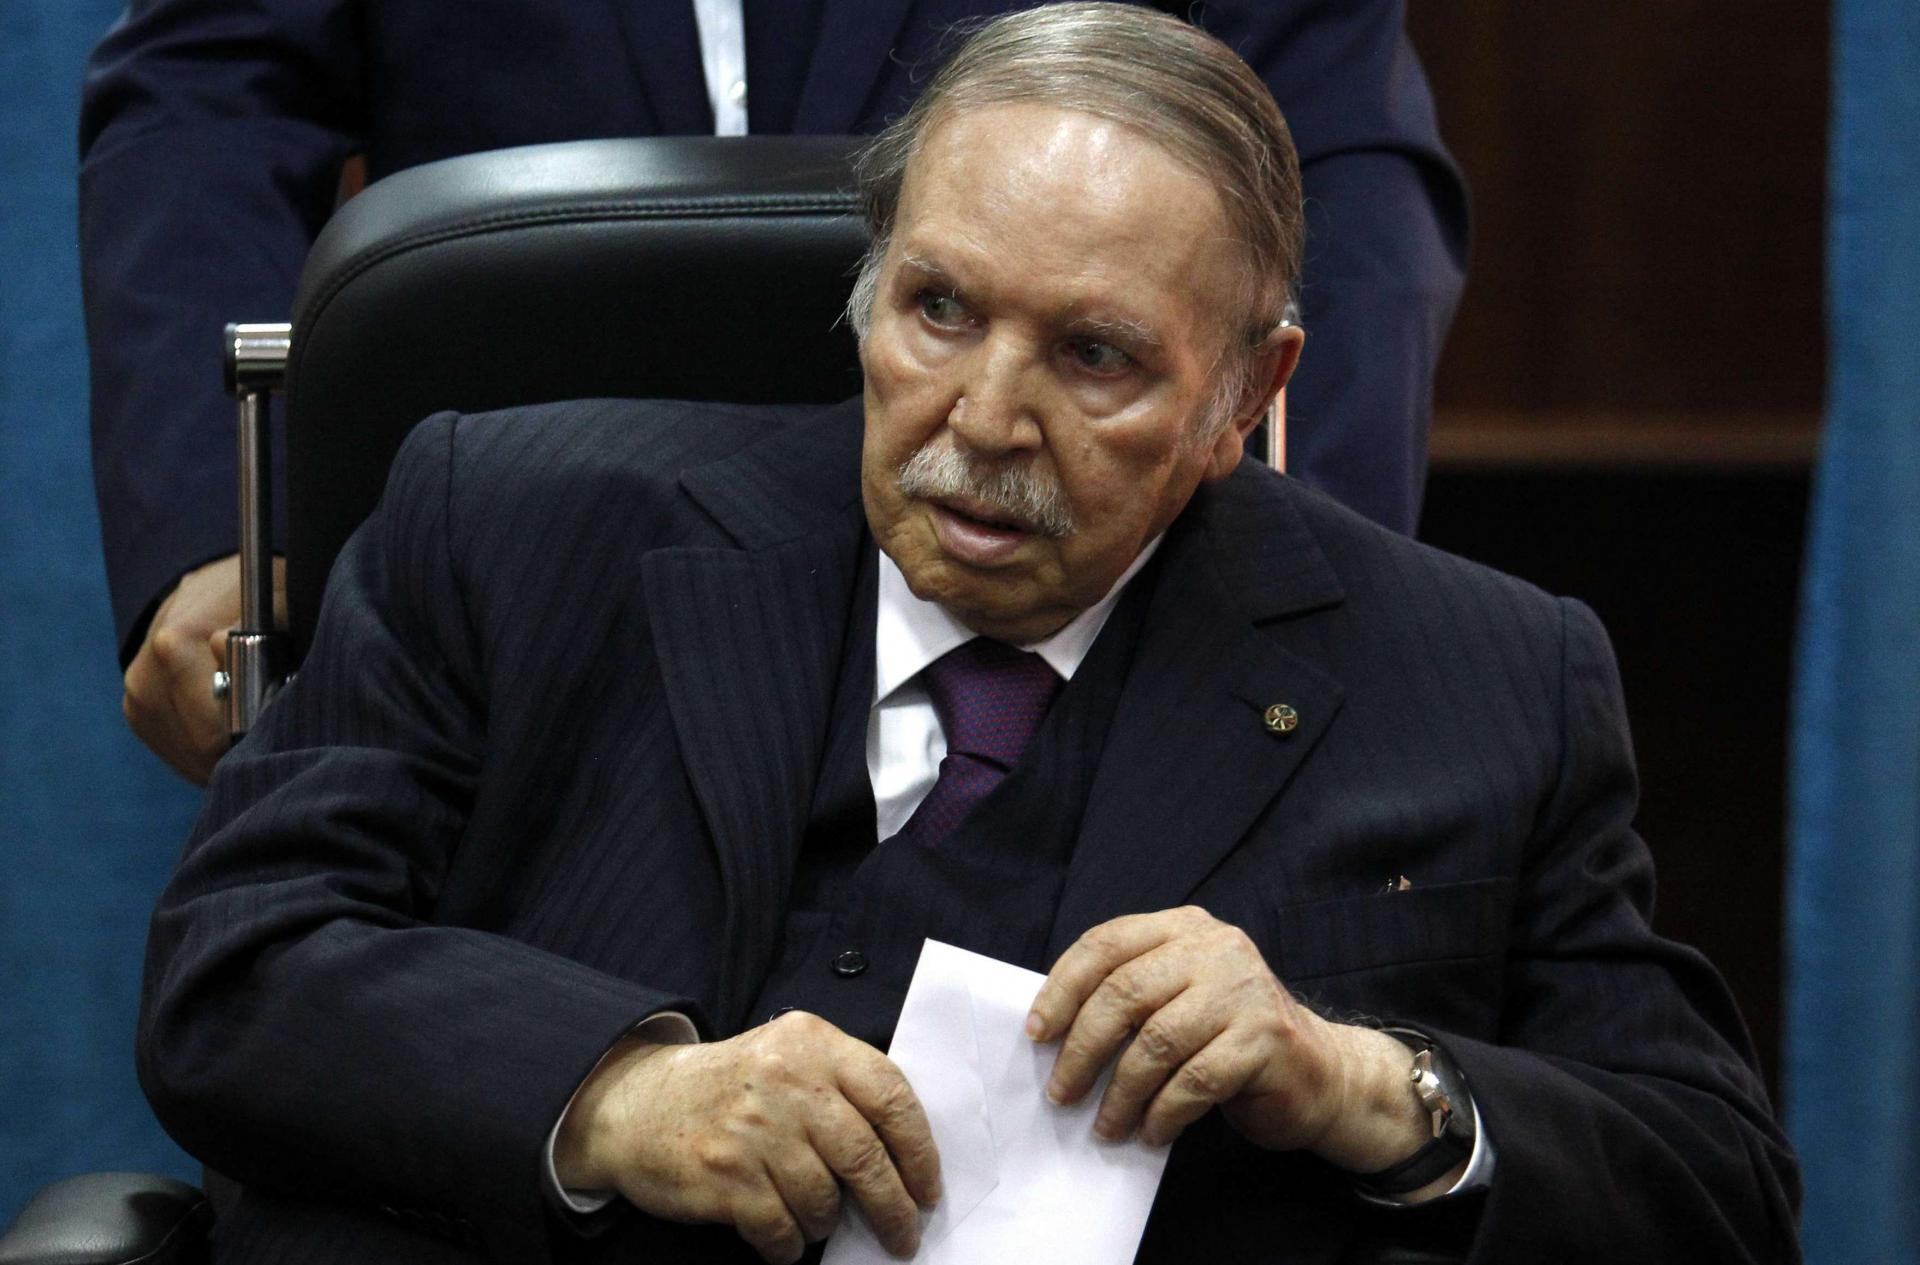 For the last presidential election in 2014, Bouteflika only declared his intention to run a few days ahead of the deadline.